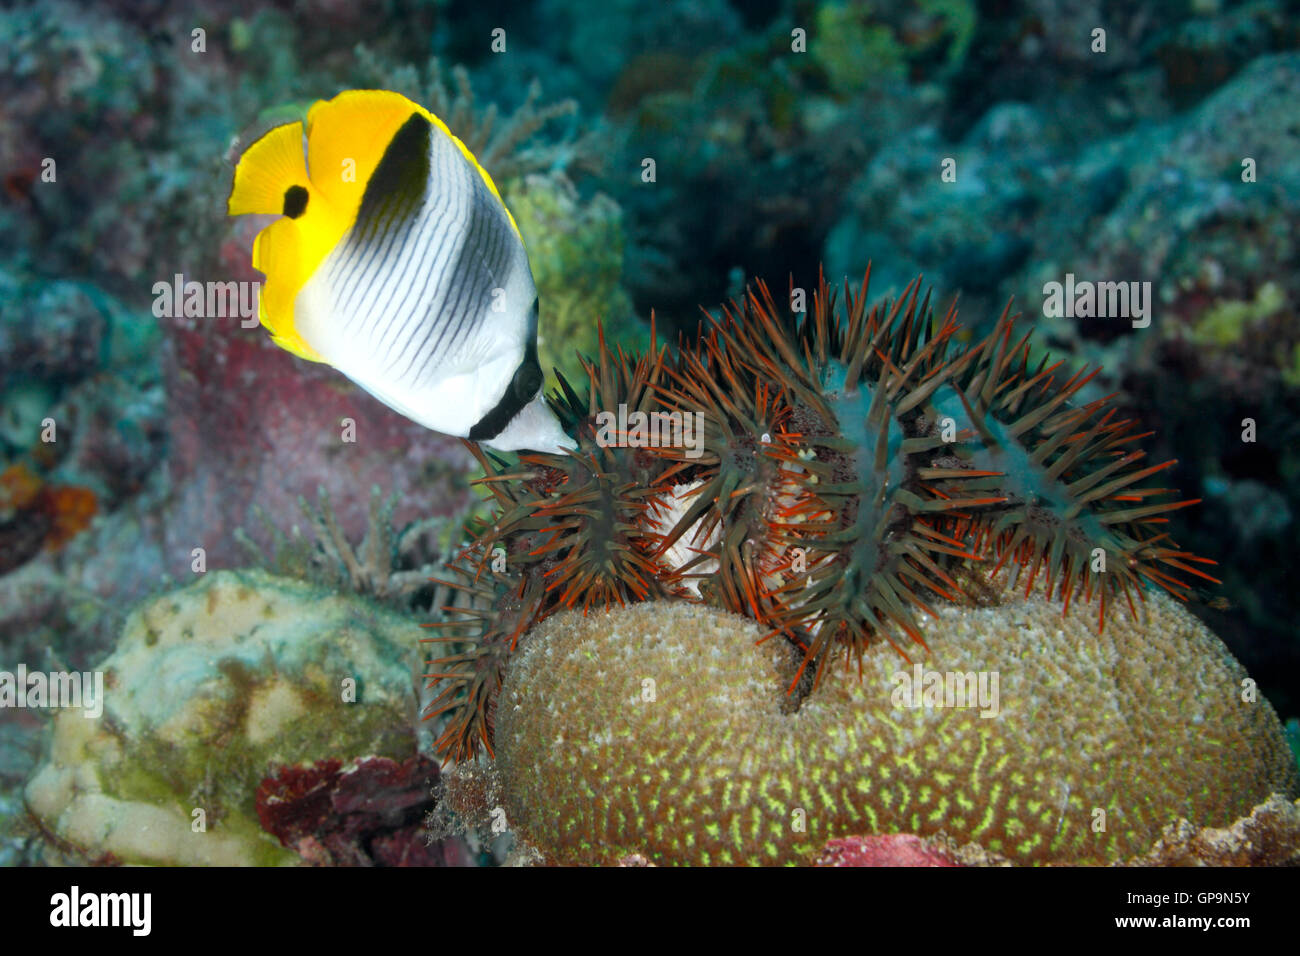 Crown of Thorns Starfish, Acanthaster planci, eating coral and being attacked by a  Butterflyfish. Stock Photo